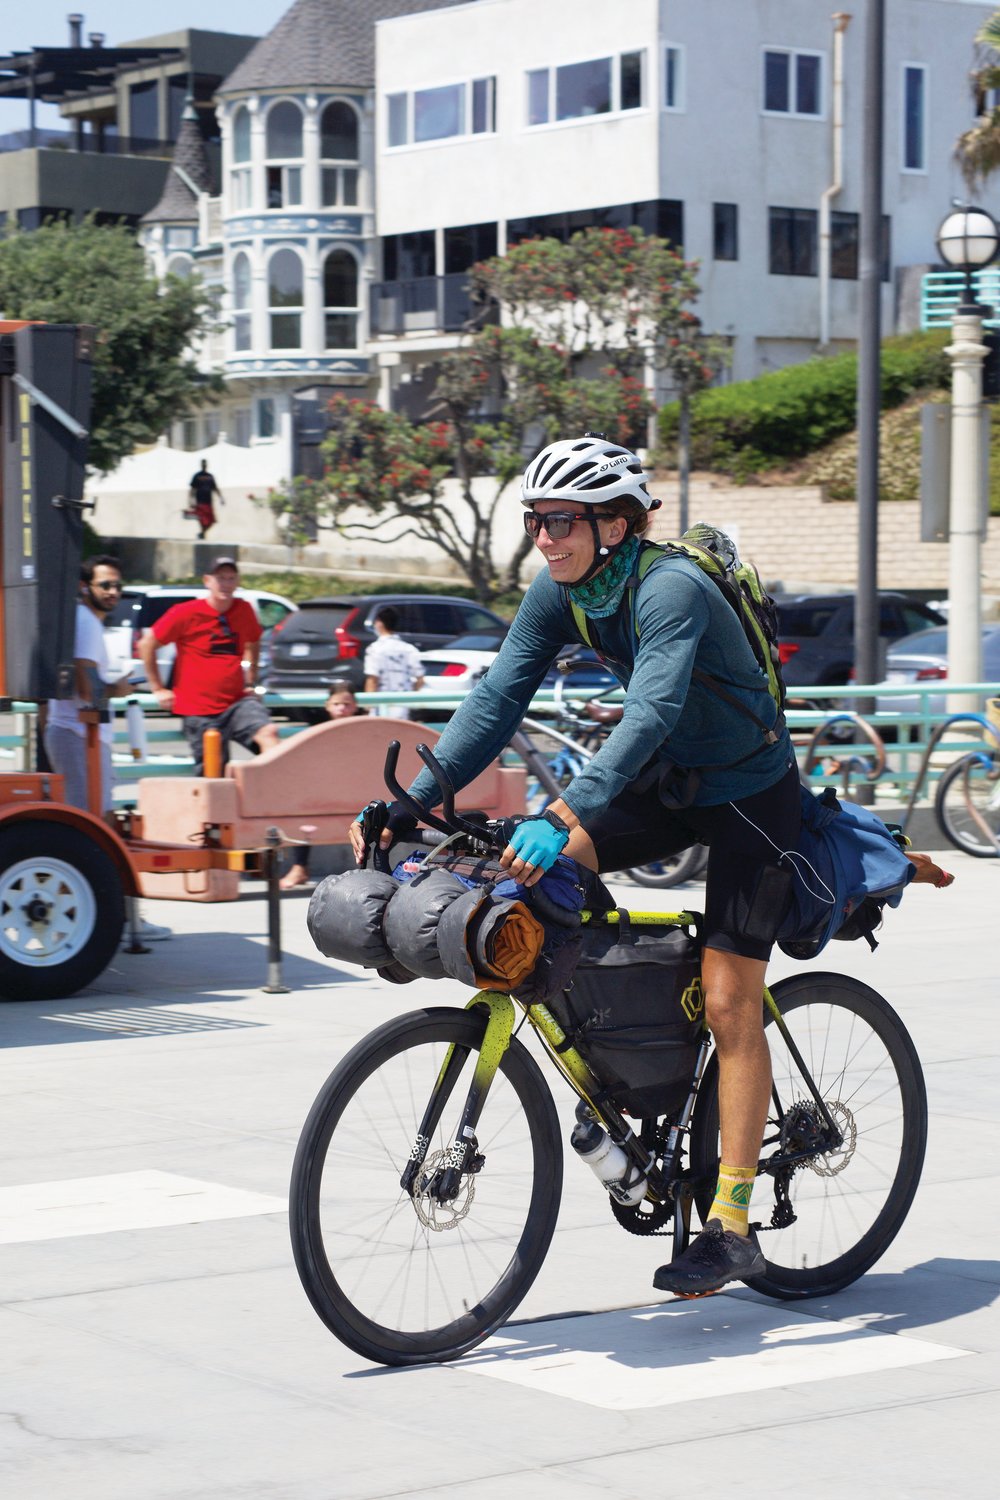 Emmaus Holder rides his bike through Los Angeles on the final day of his cross-country cycling trip, which doubled as a research trip centered around fetal alcohol spectrum disorder (FASD).